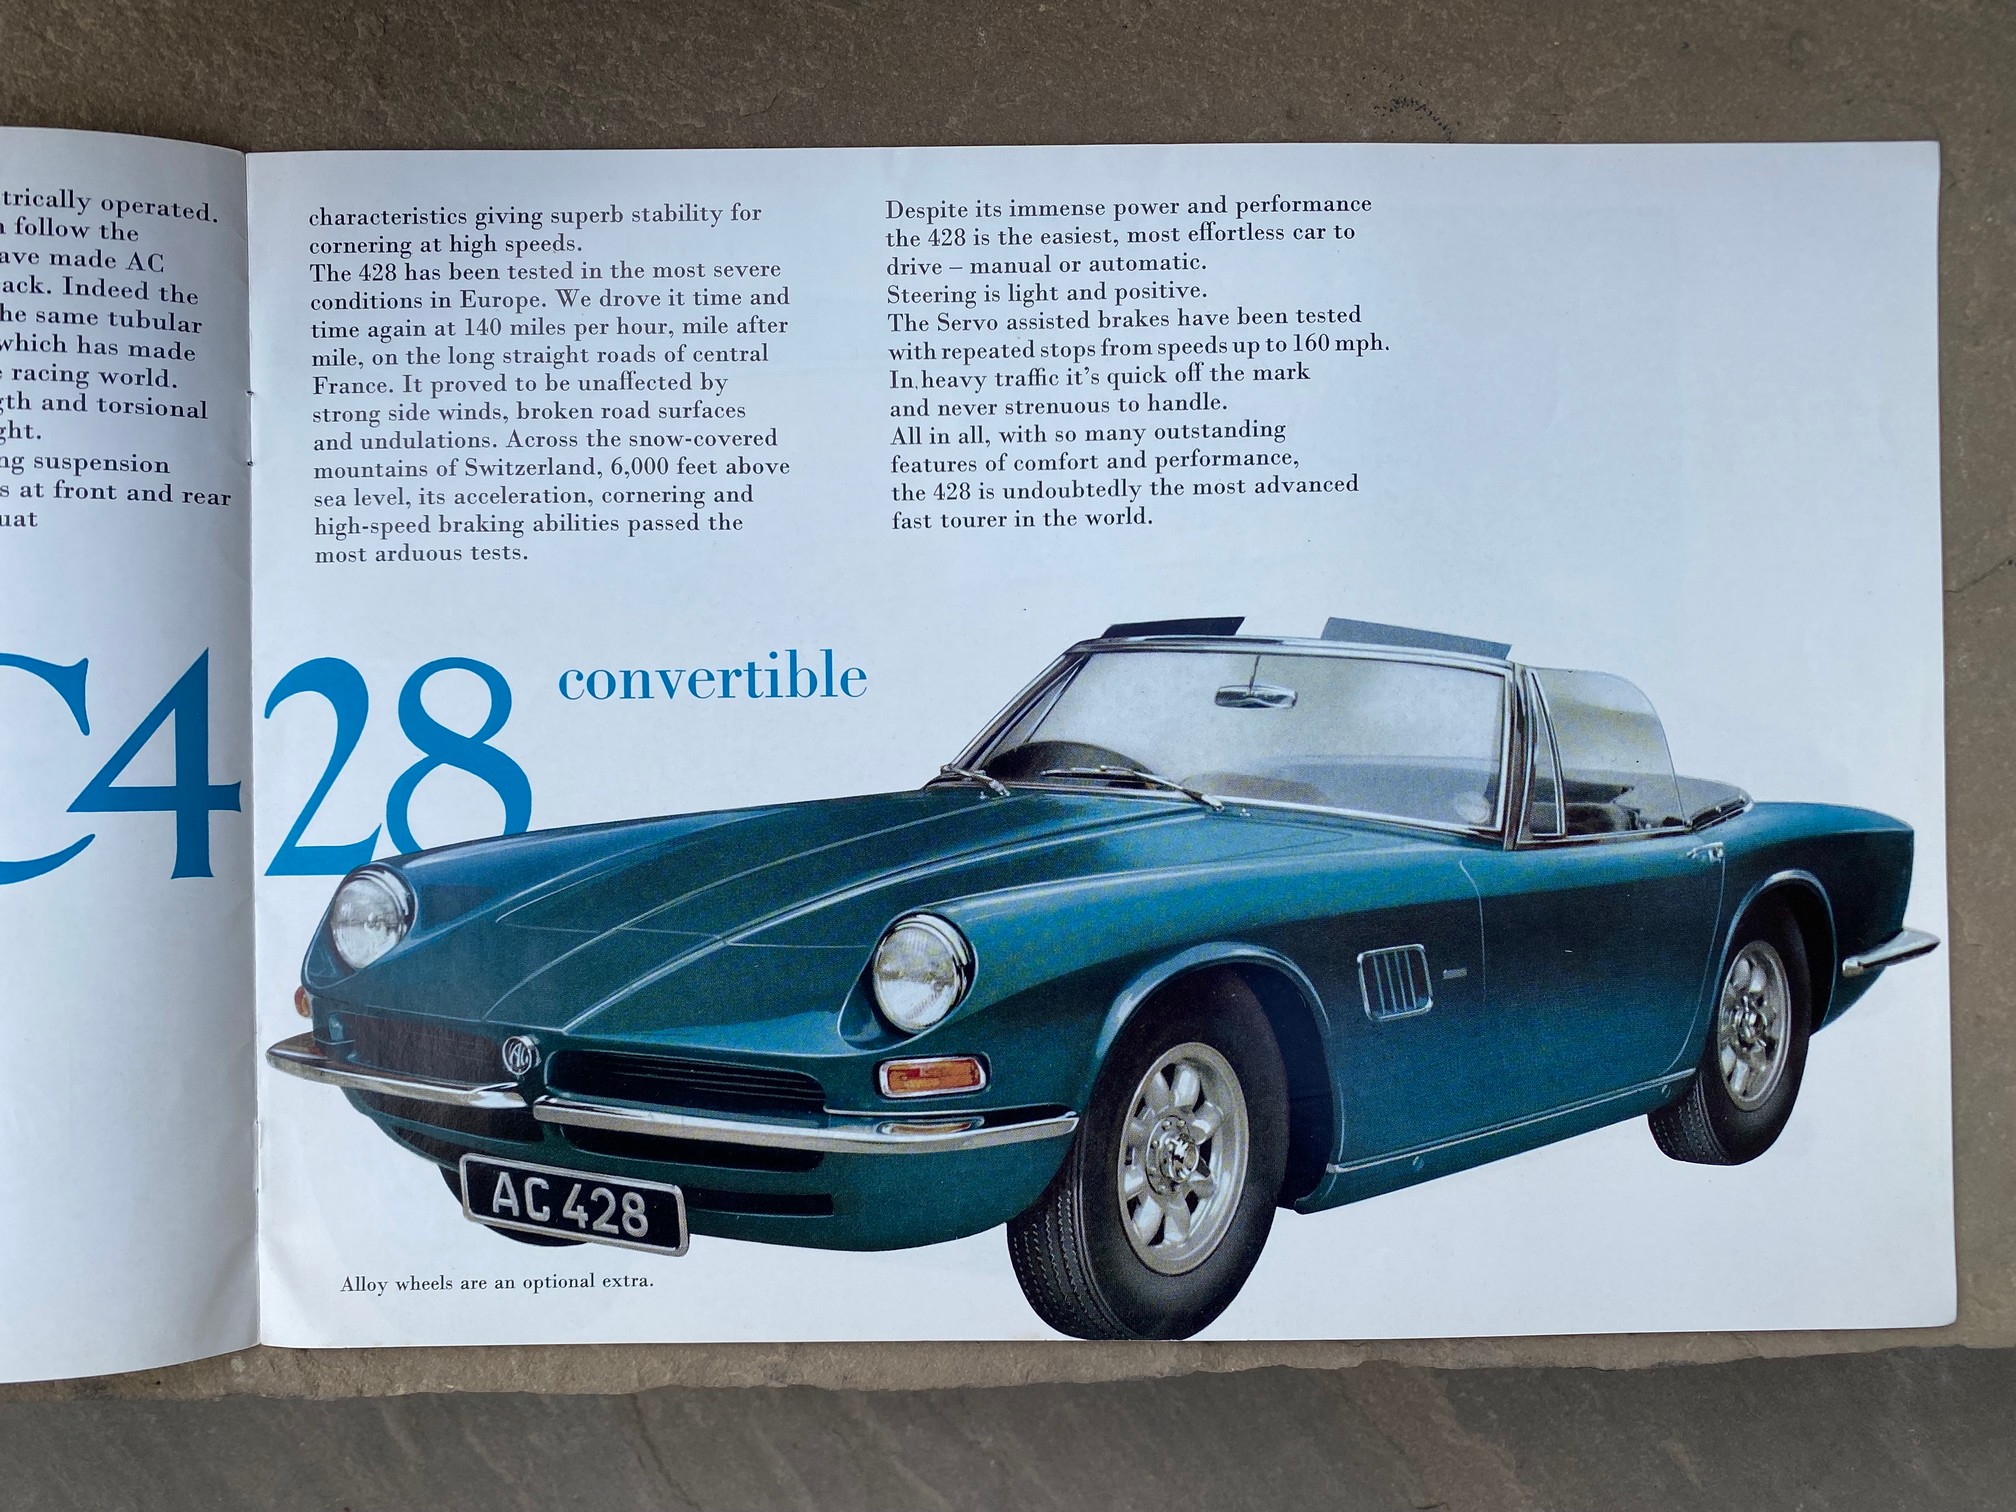 An AC428 Convertible sales brochure. - Image 2 of 2